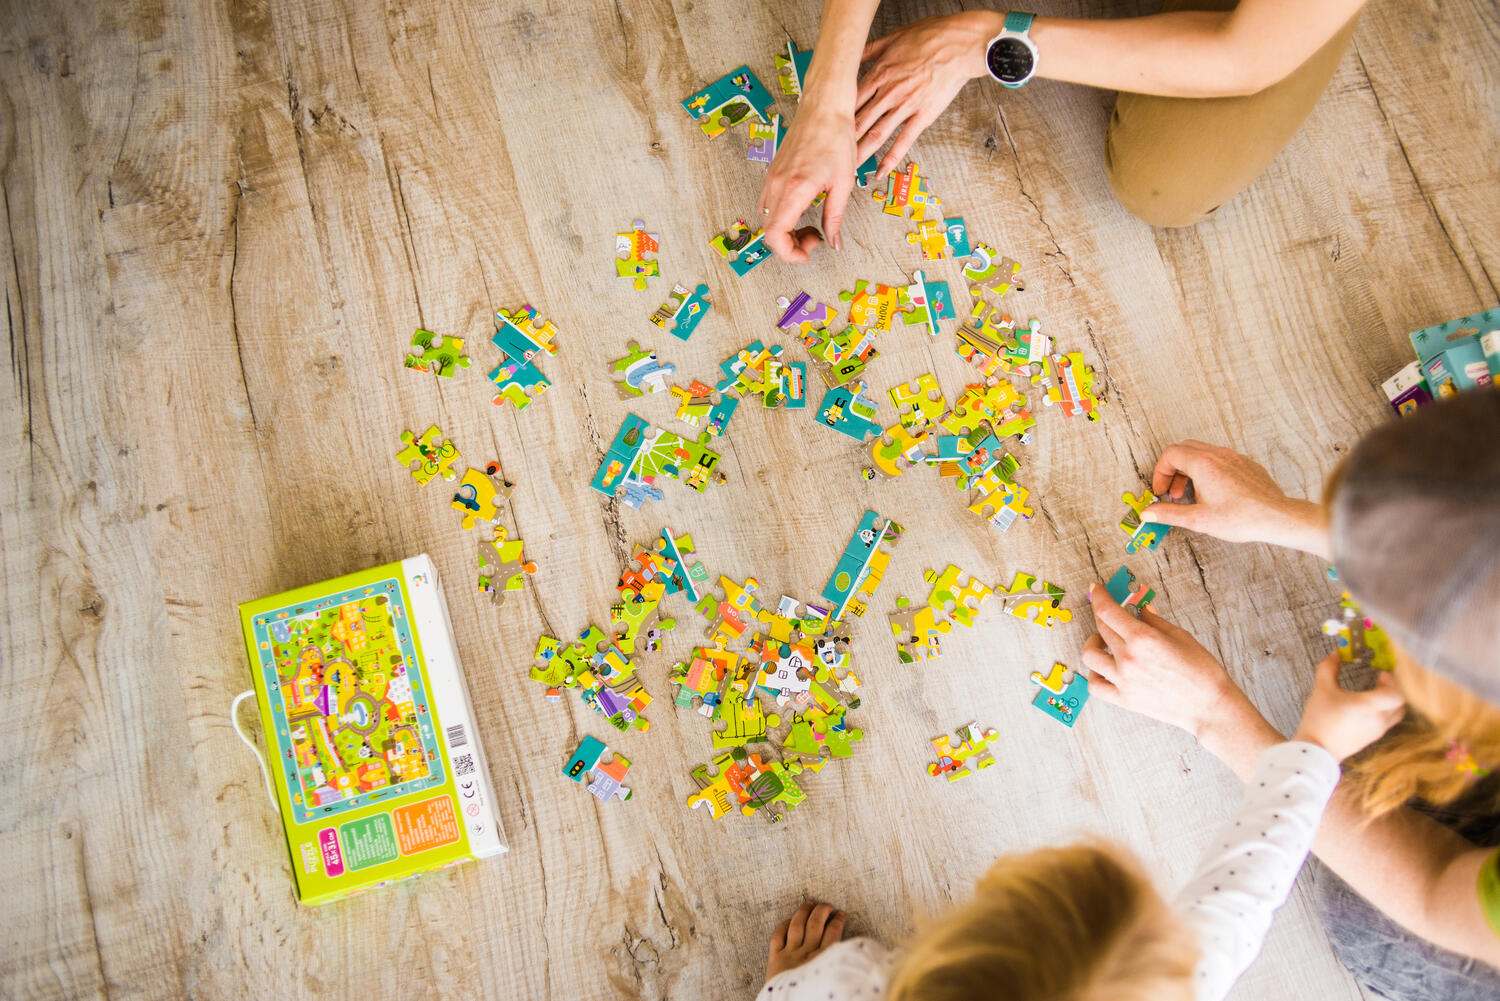 Puzzle - Orasul (80 piese) PlayLearn Toys